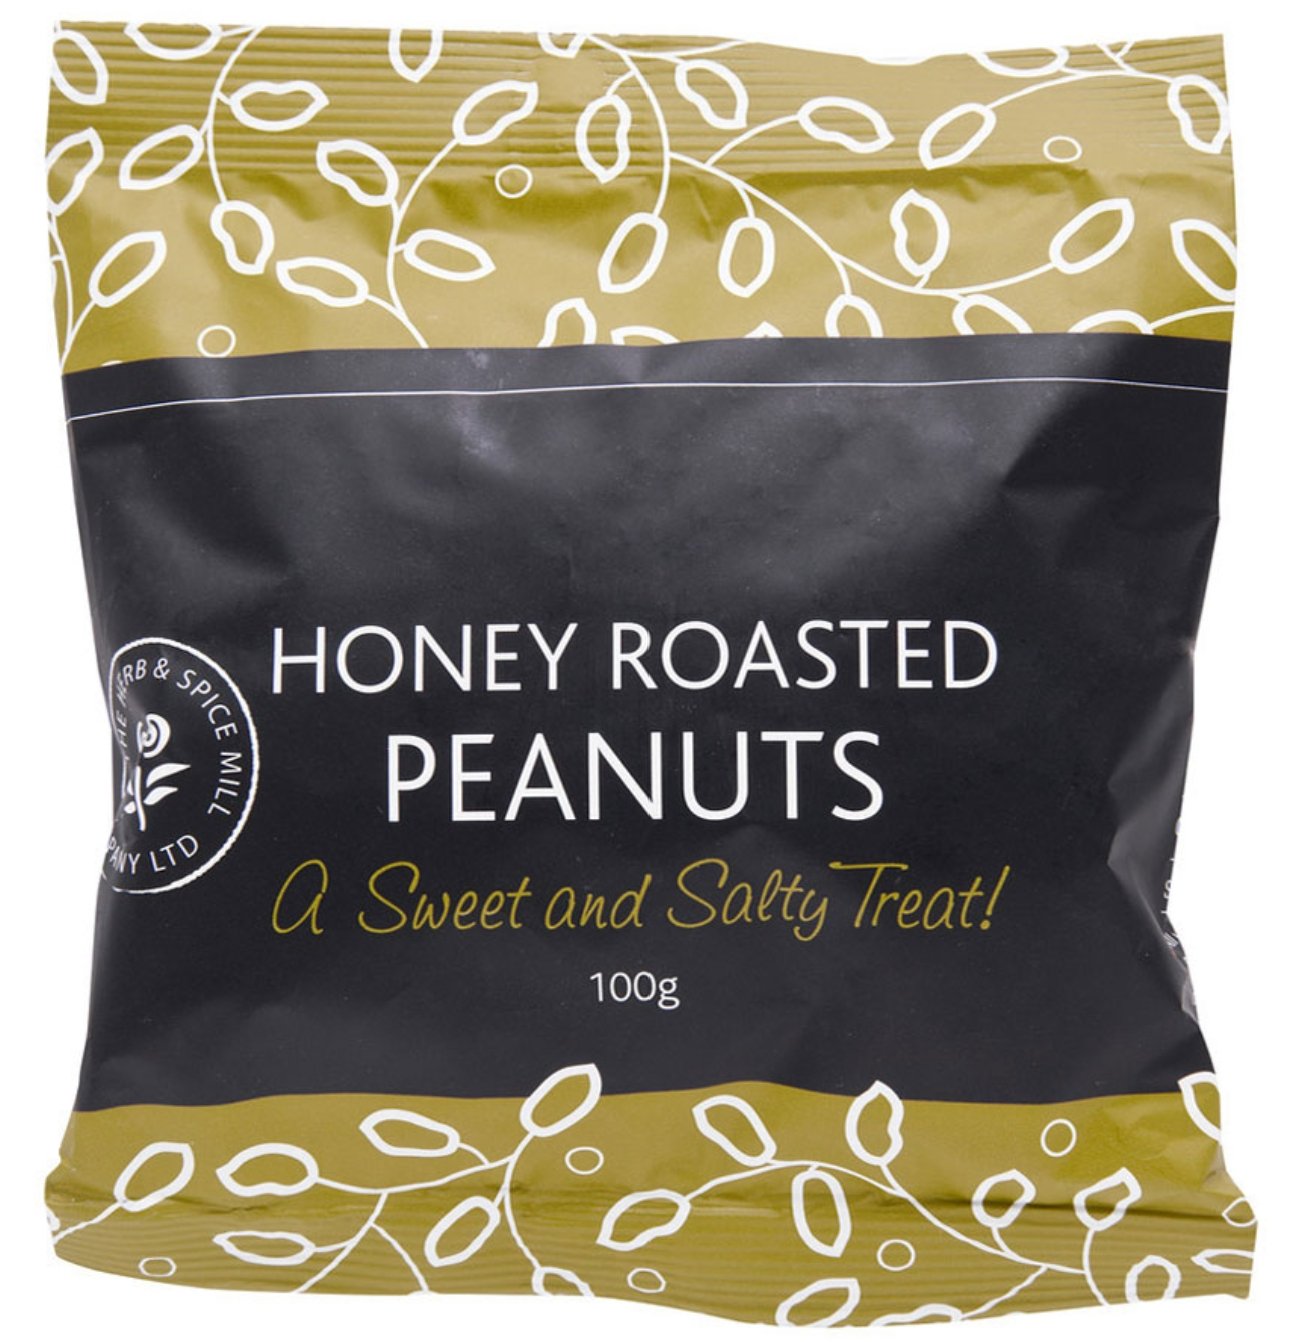 Herb and Spice Fine Foods Honey Roasted Peanuts 100g - Beautiful Gifts - Packaged with Love